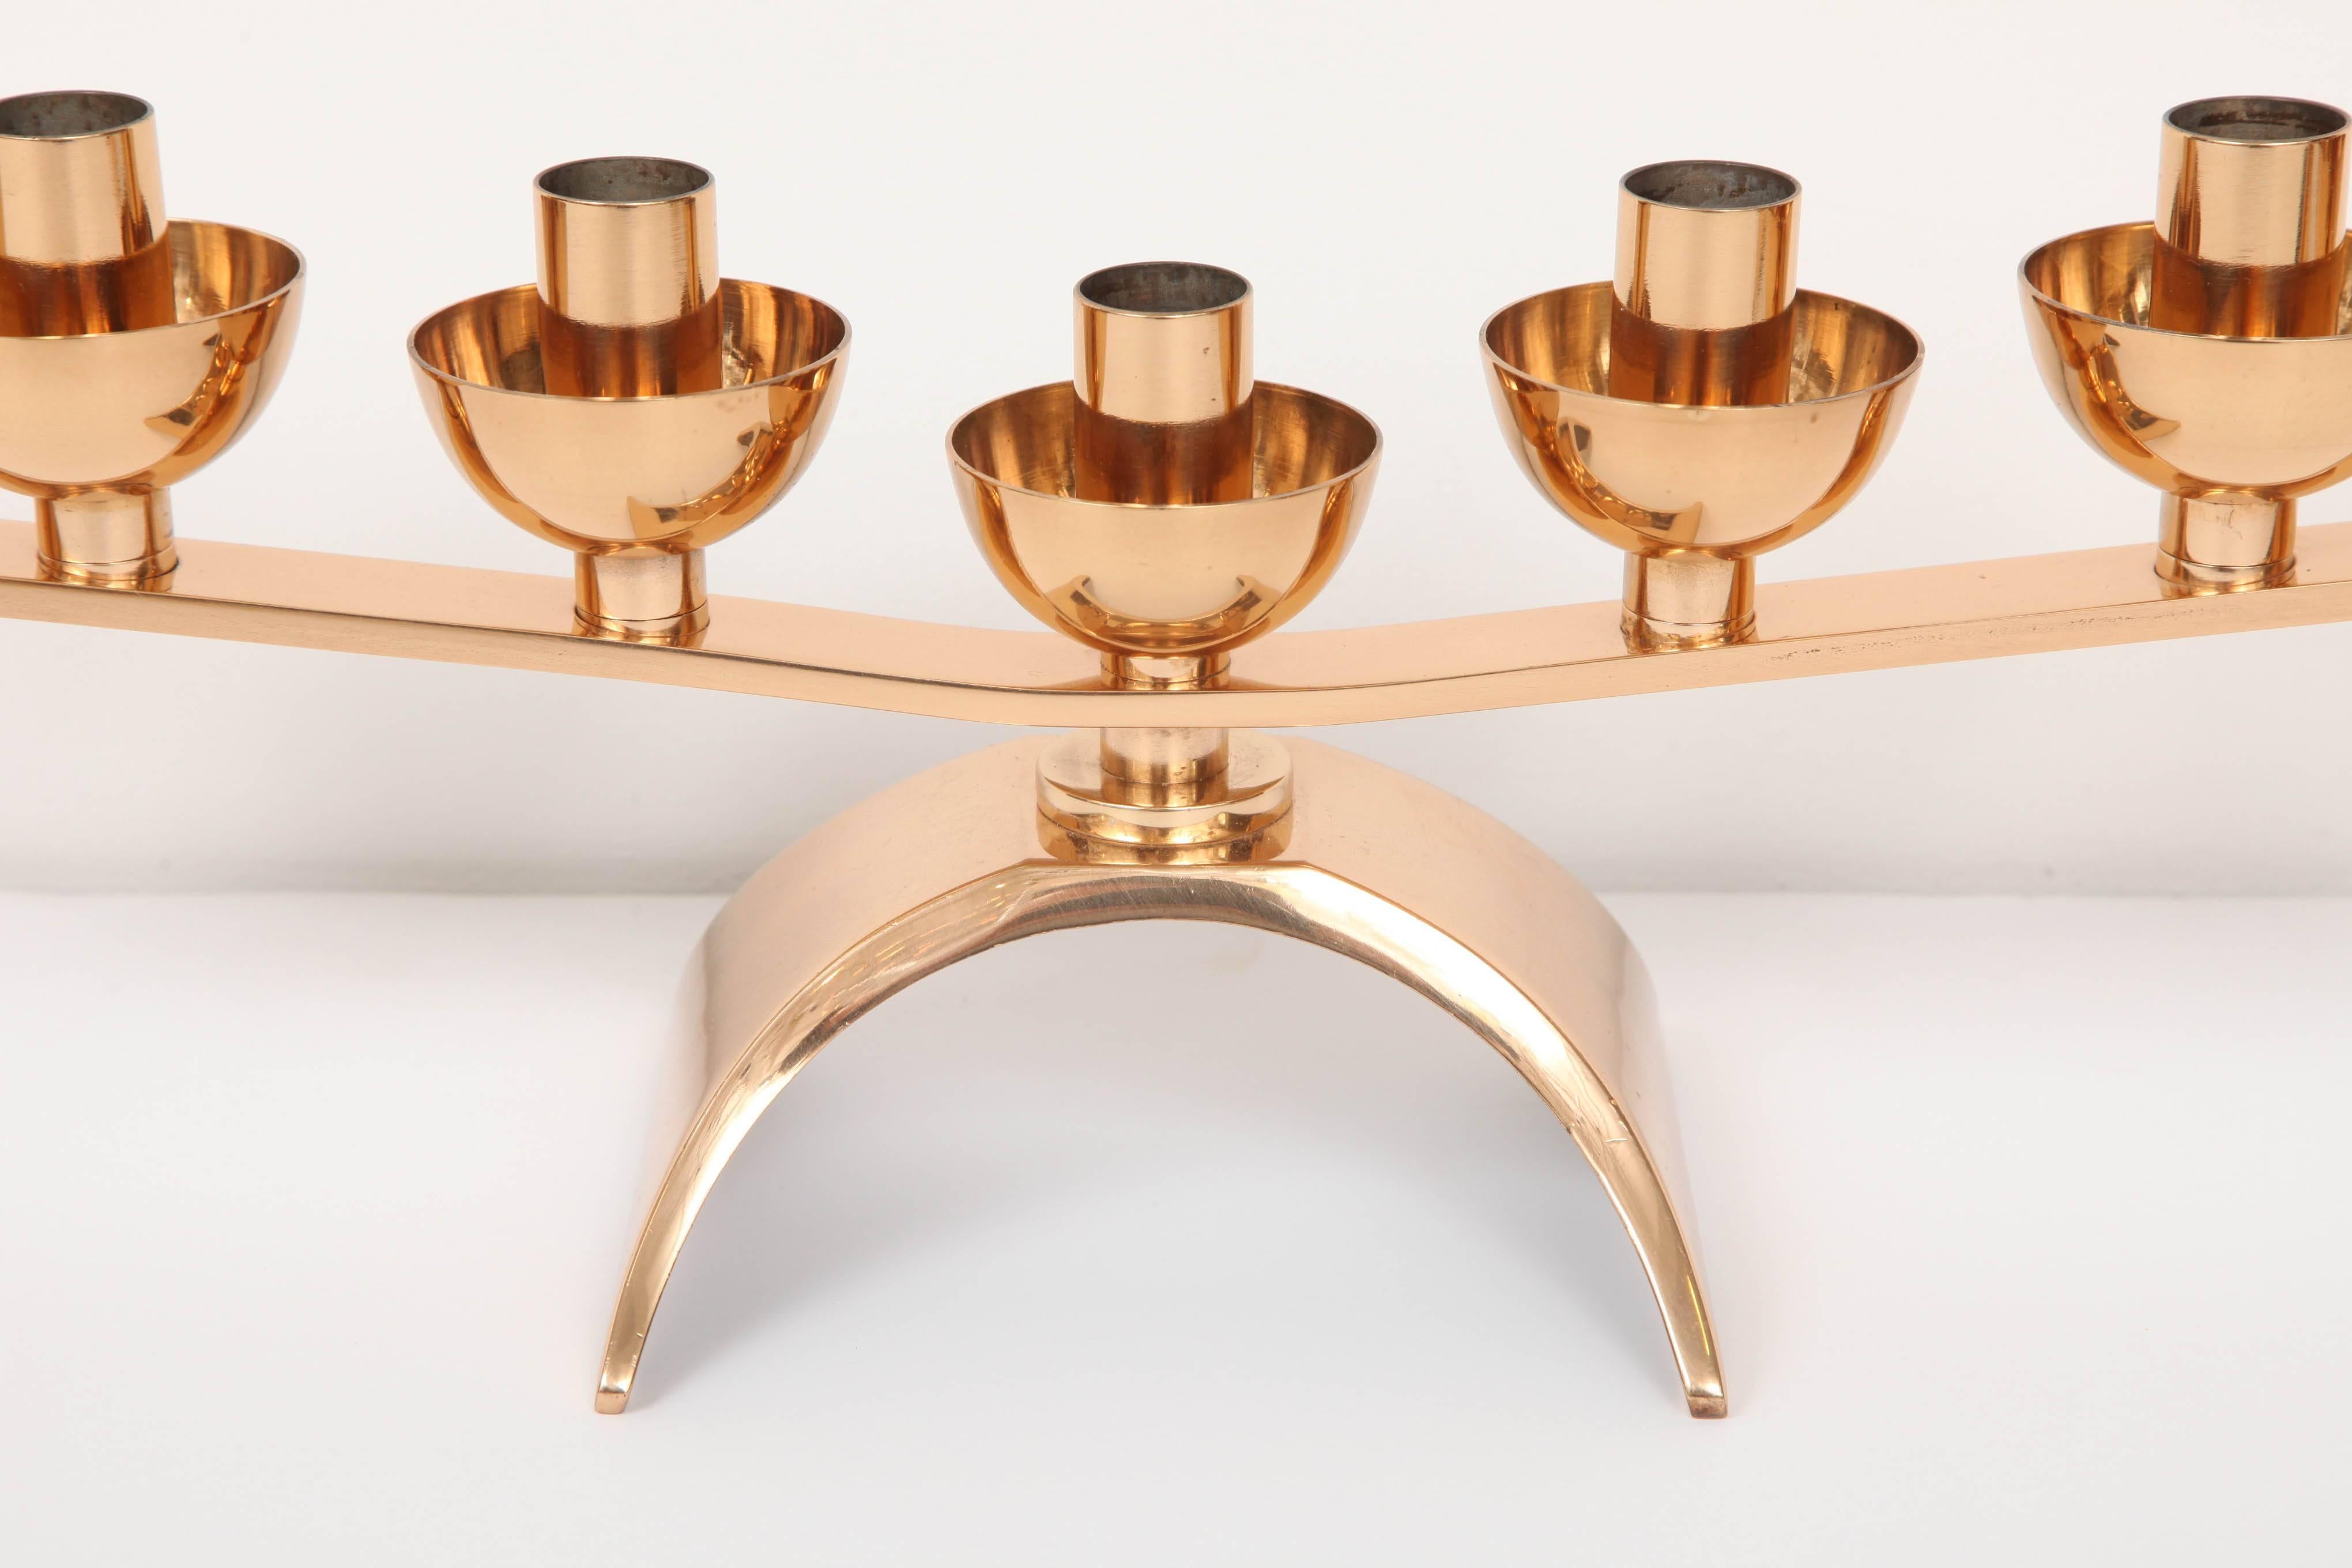 Pair of Brass Mid-Century Modern Candleholders, circa 1960 For Sale 2